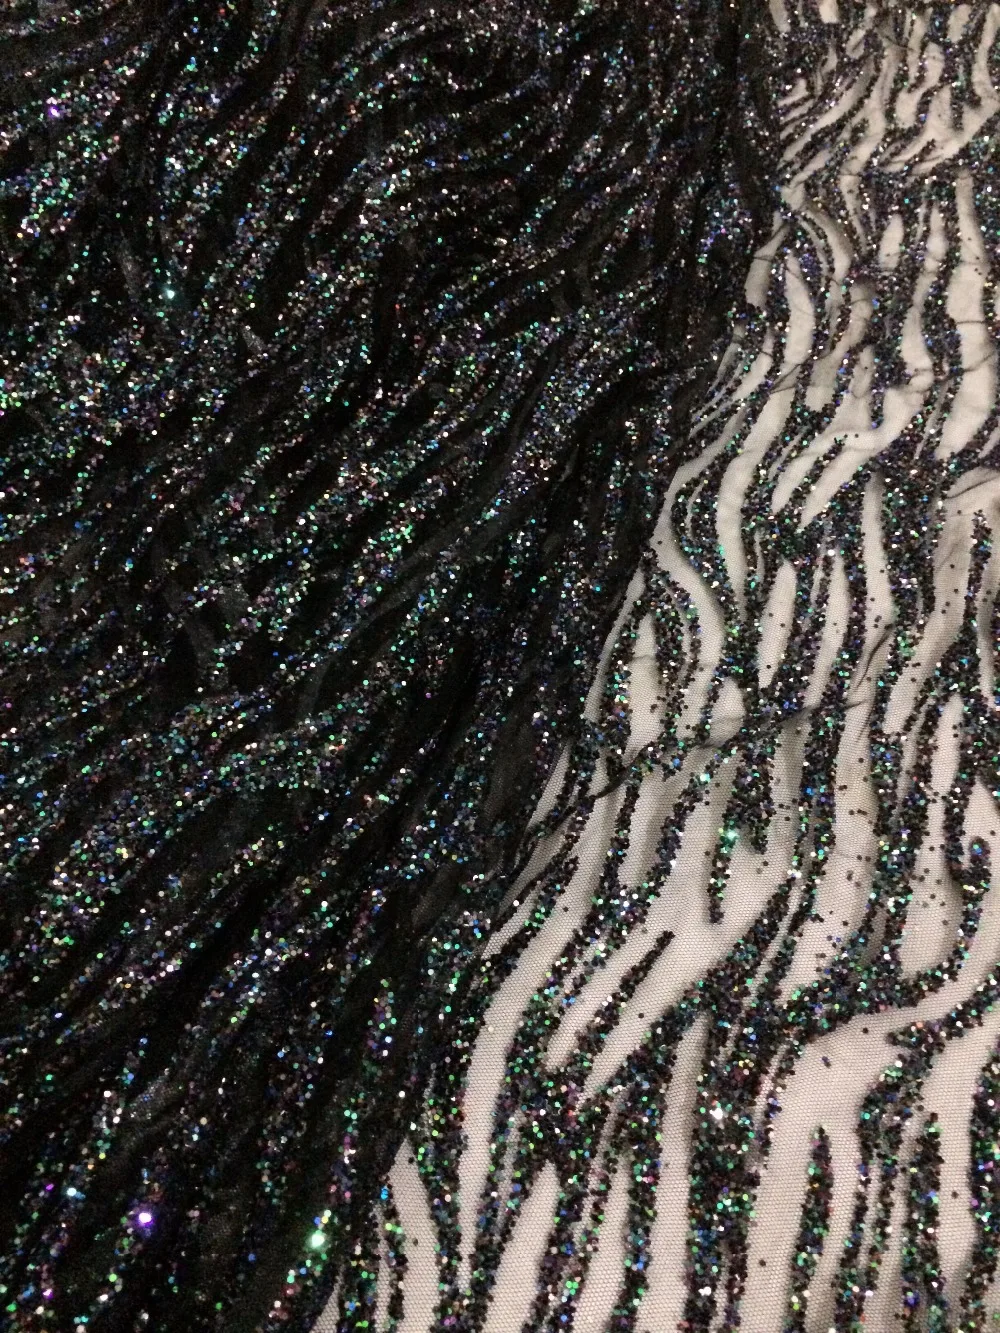 

Hot Selling SYJ-81913 Nigerian glitter Lace Fabric African Lace Fabric High Quality glued glitter fabric